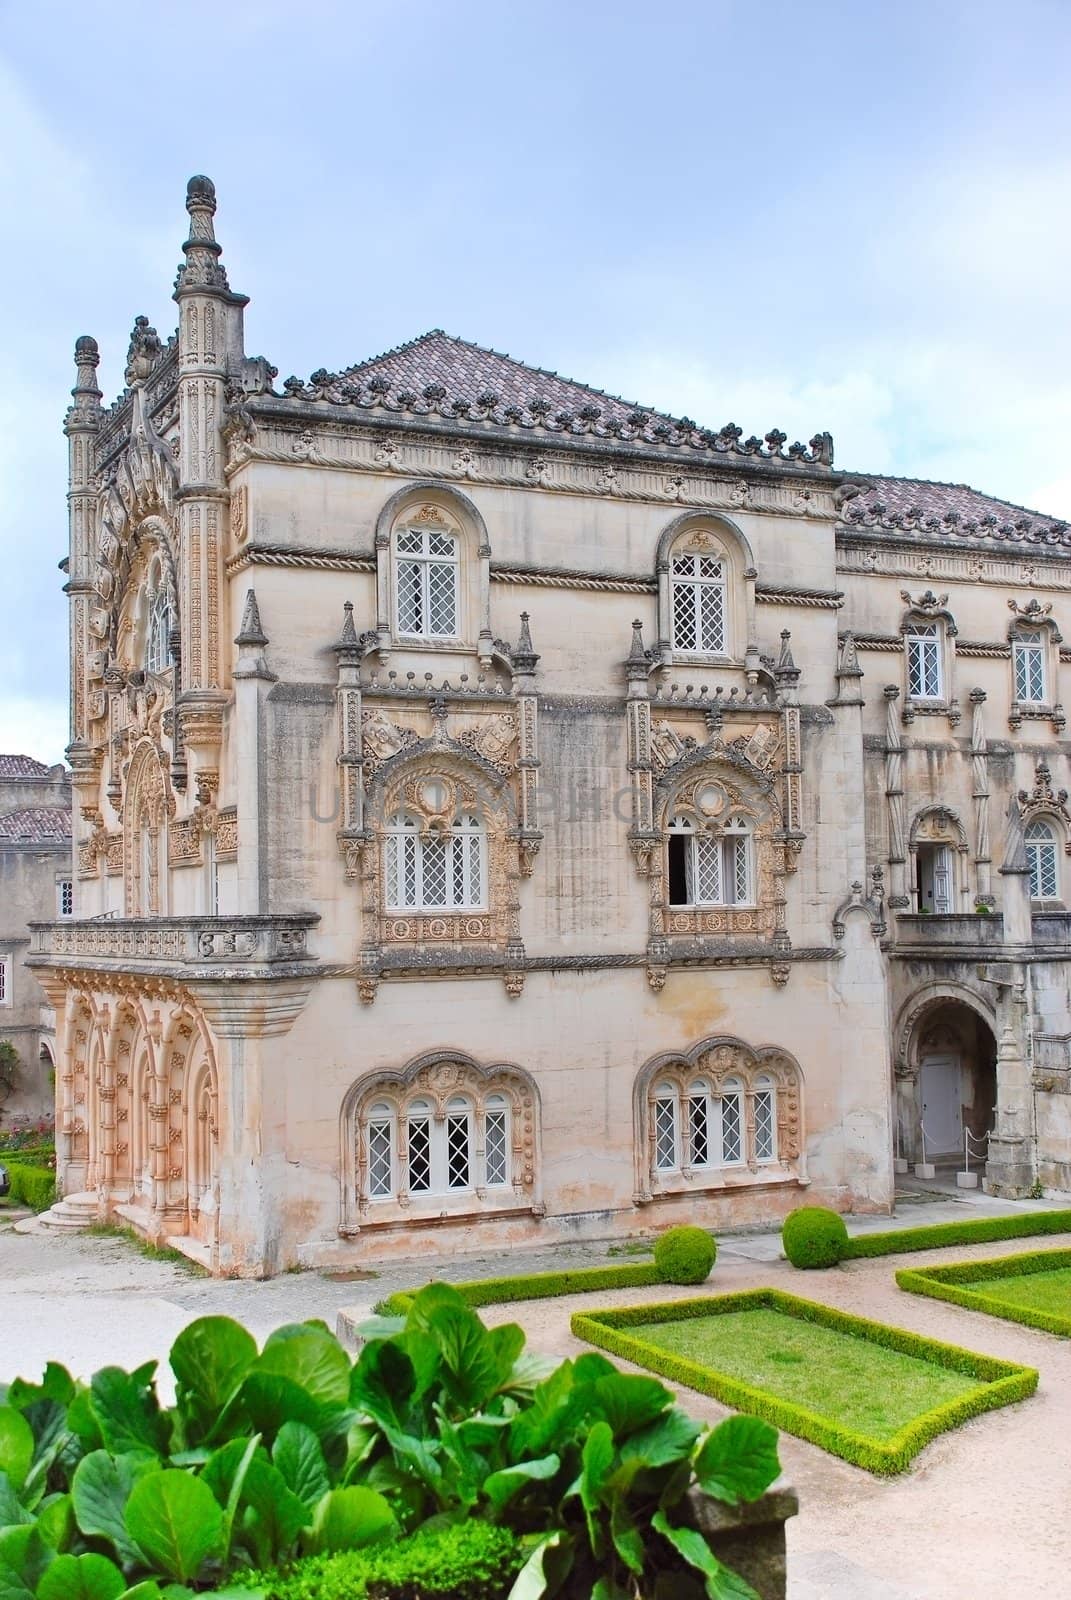 The Bucaco or Bussaco Palace Hotel - the beautiful manueline style architectural model, Portugal